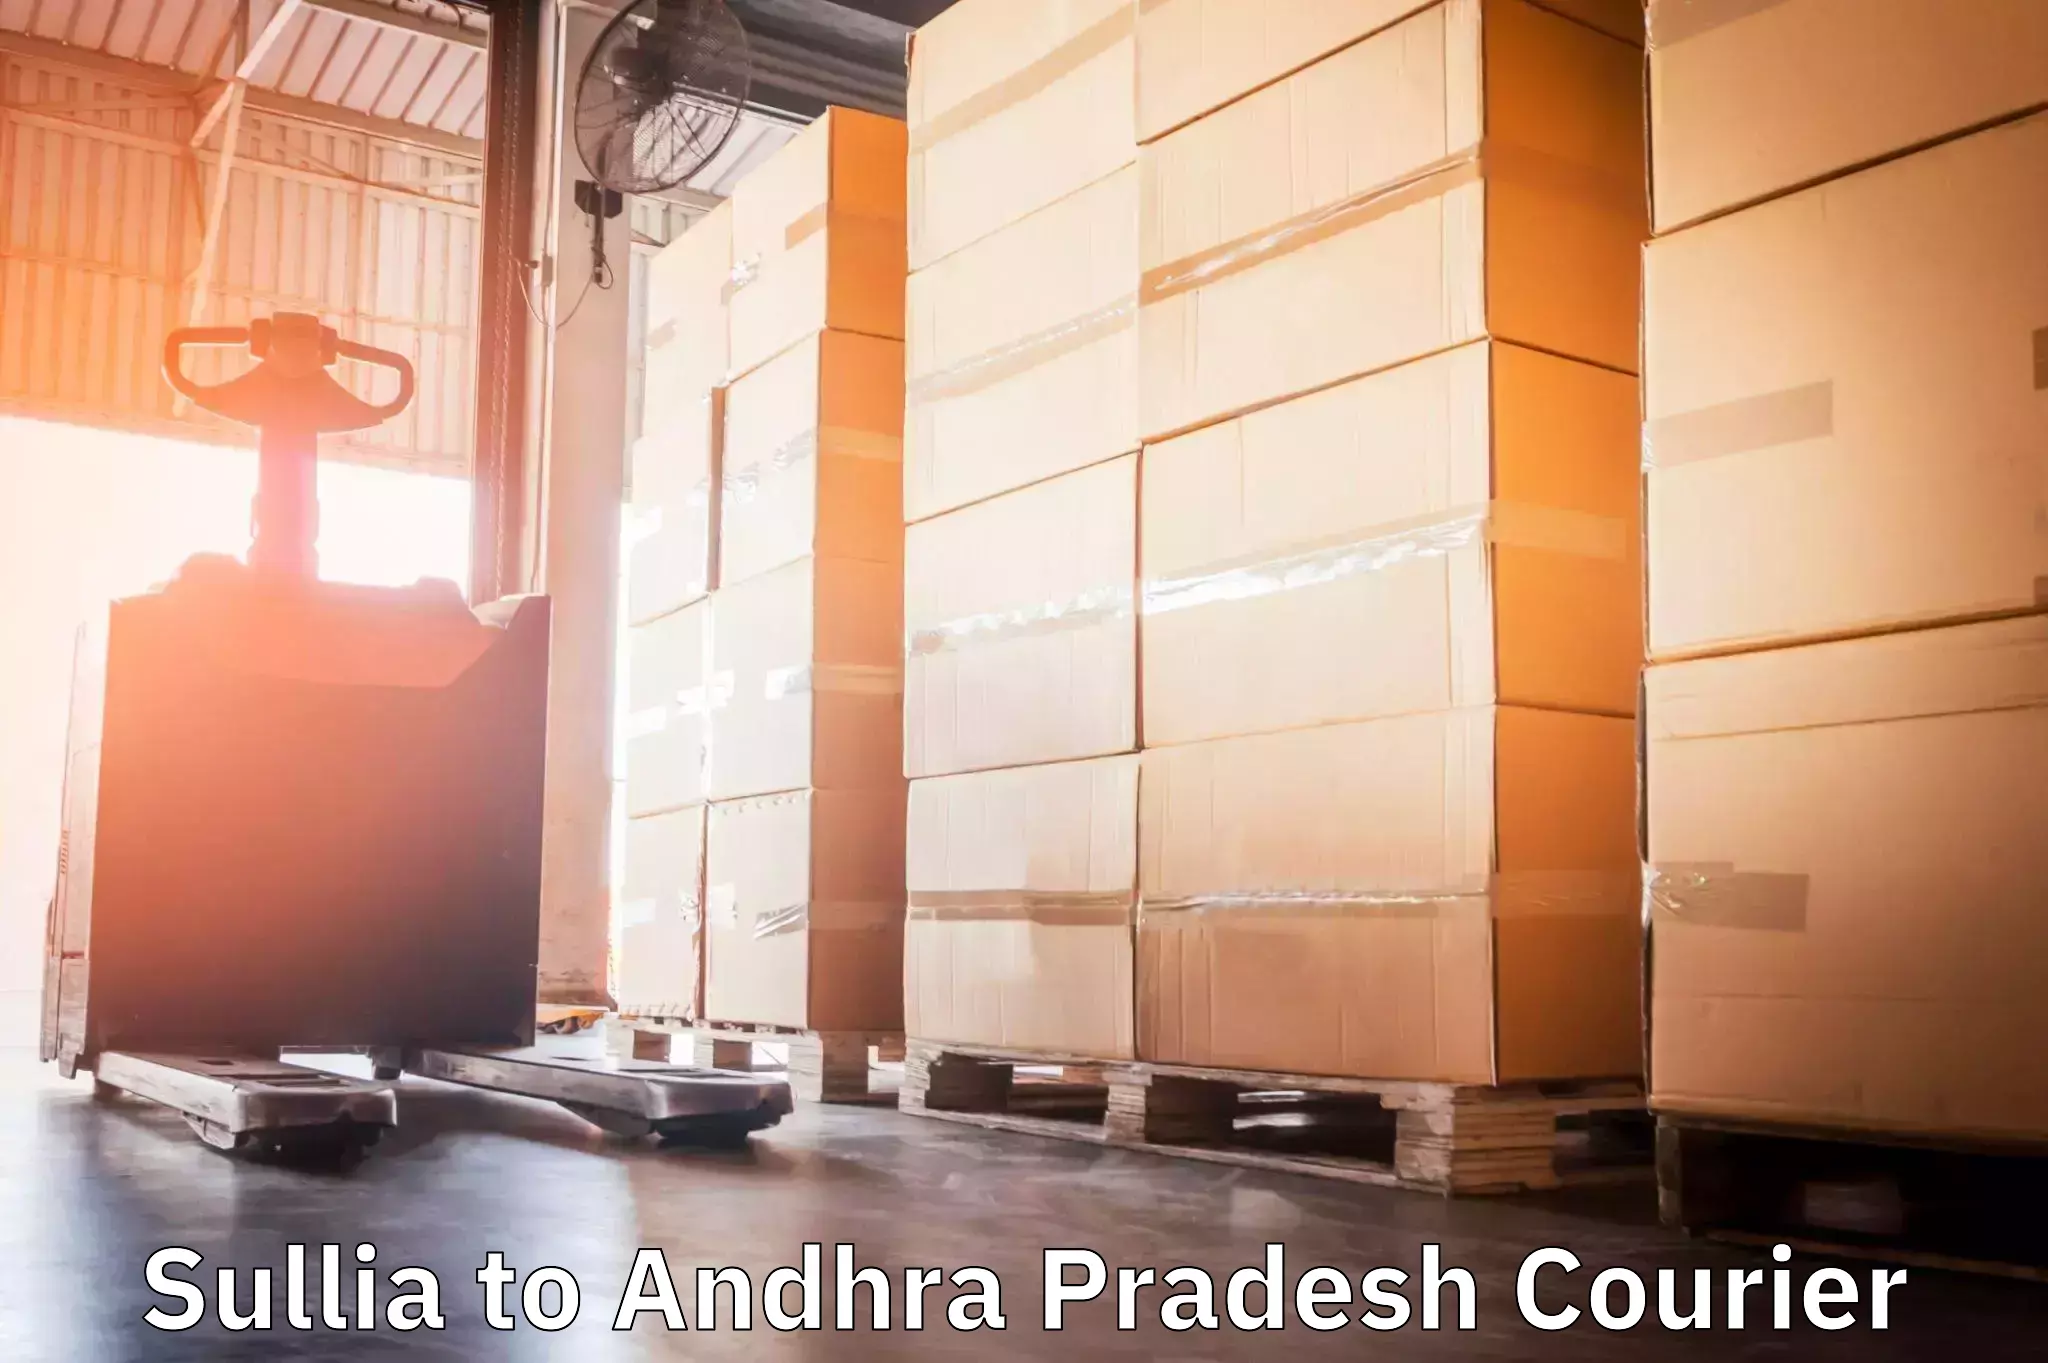 Courier service partnerships in Sullia to Andhra Pradesh